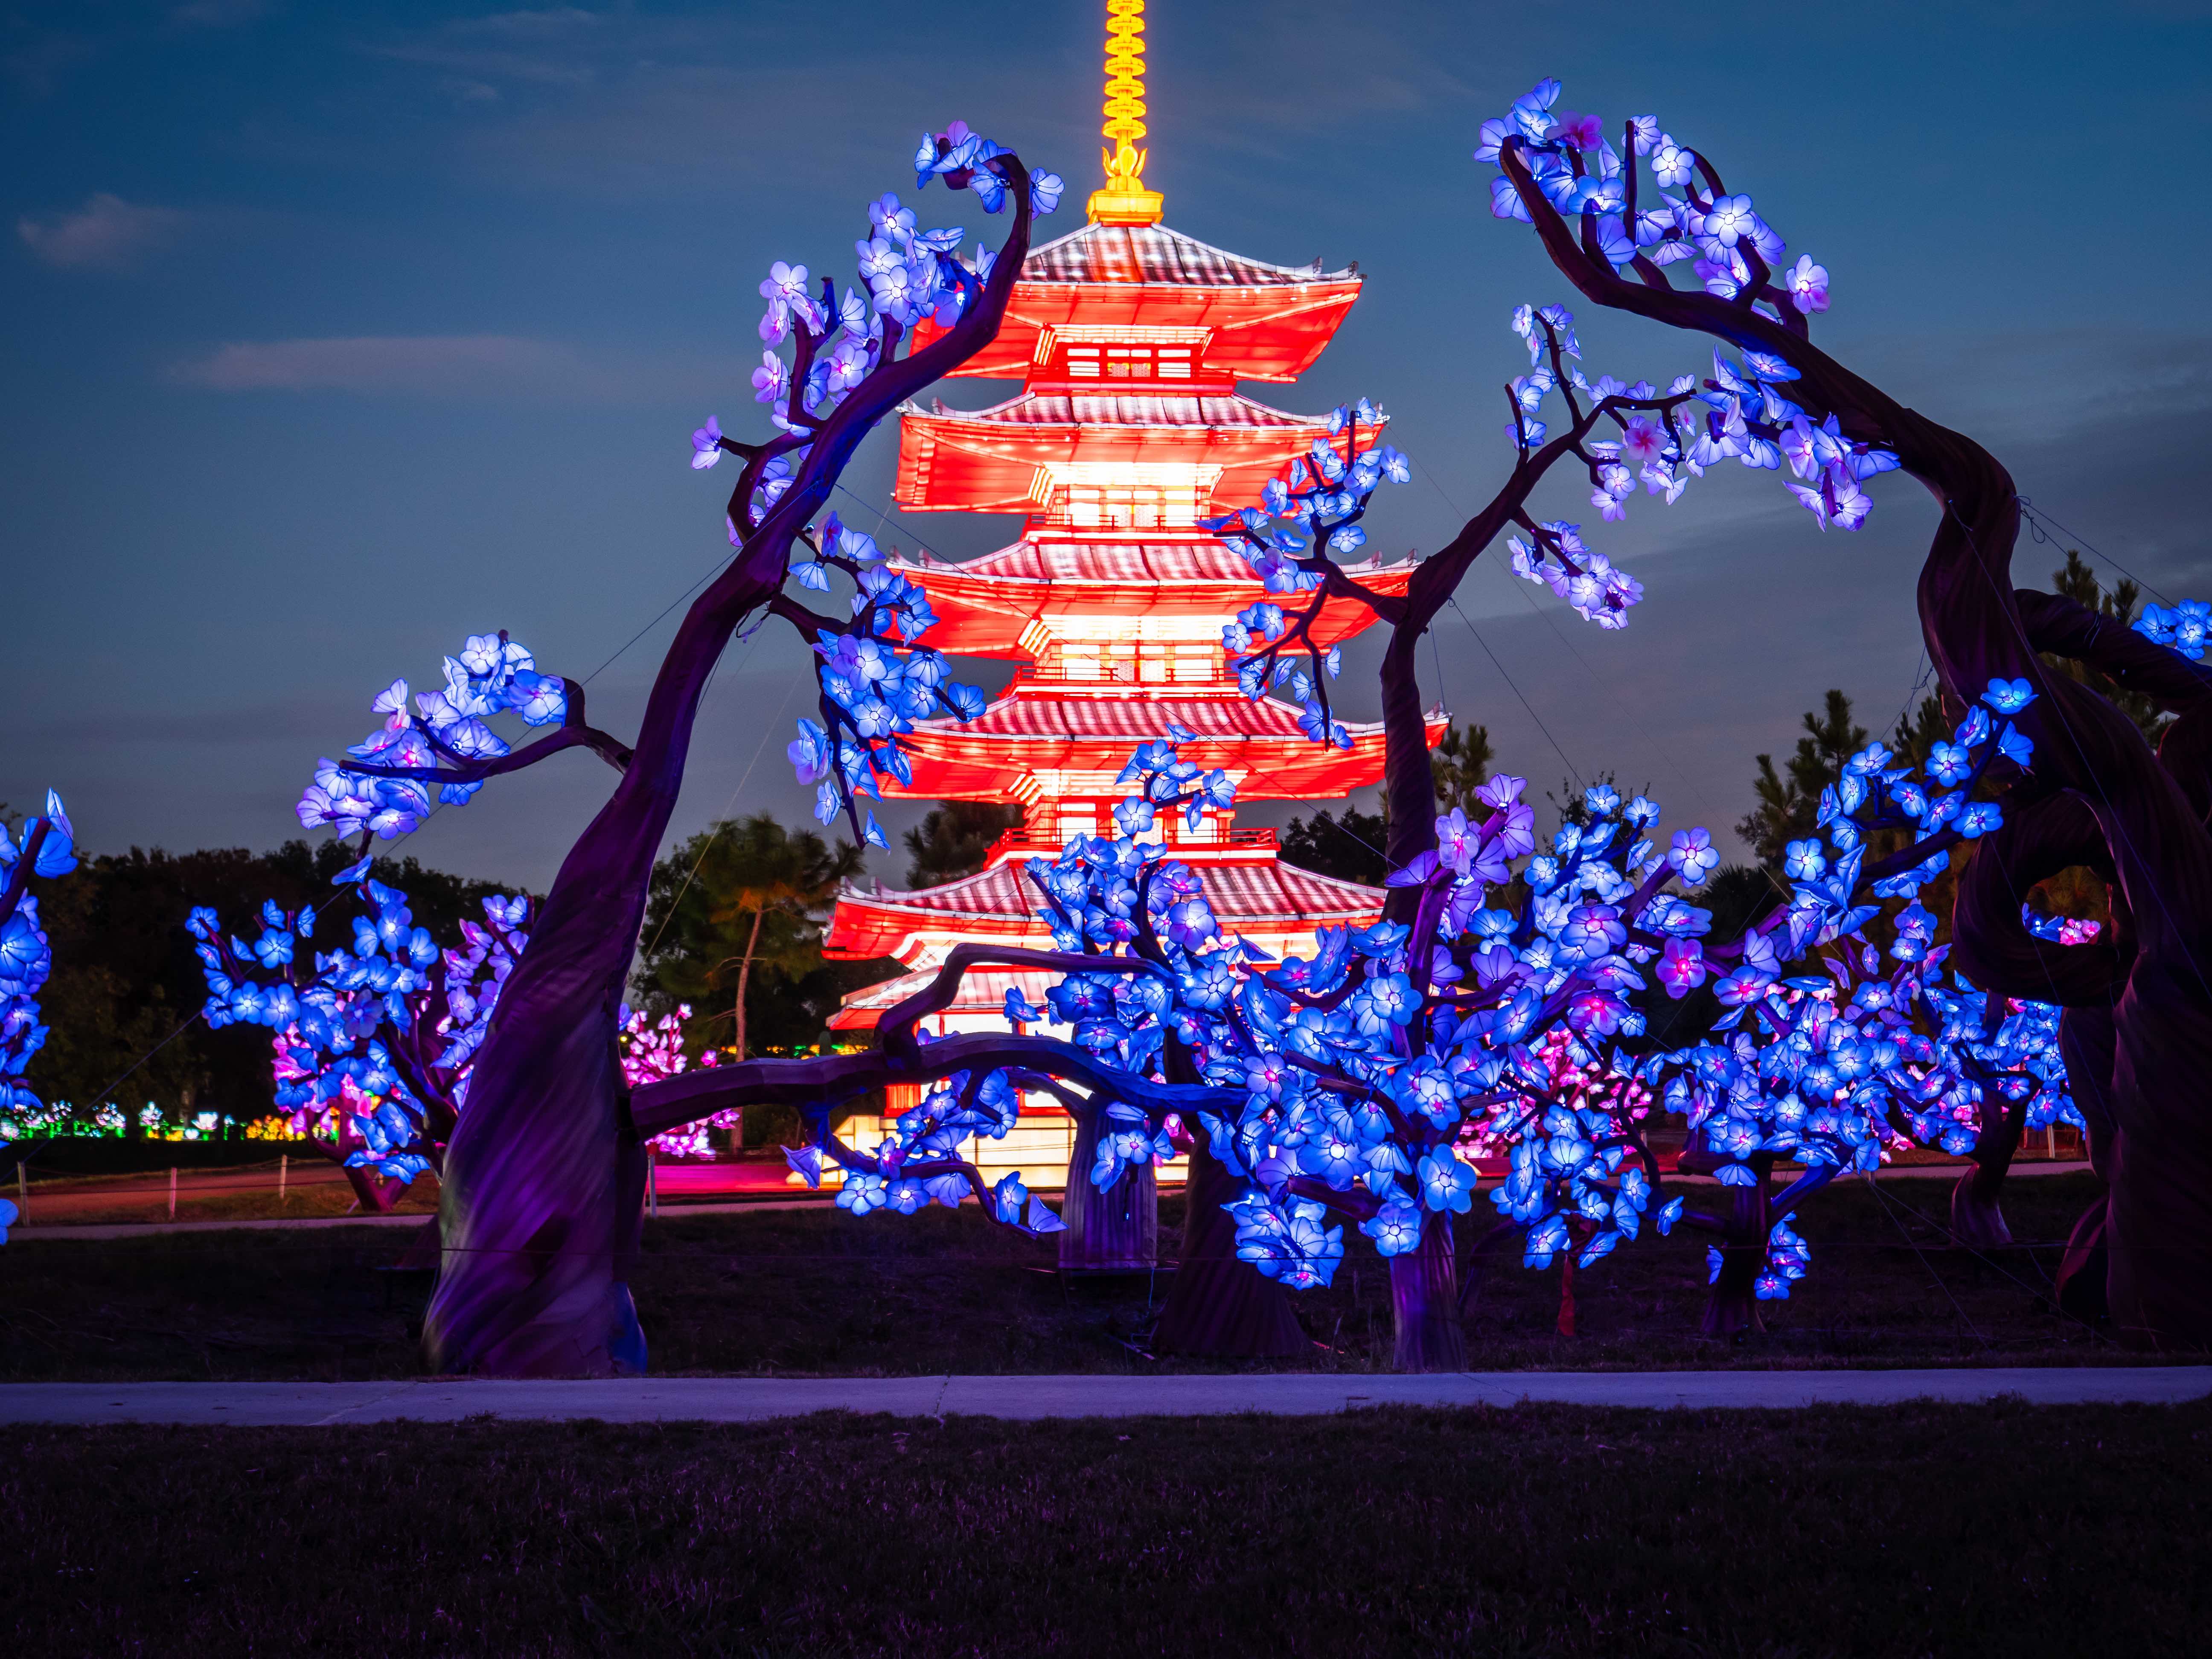 Pagoda structure lit up at night. 